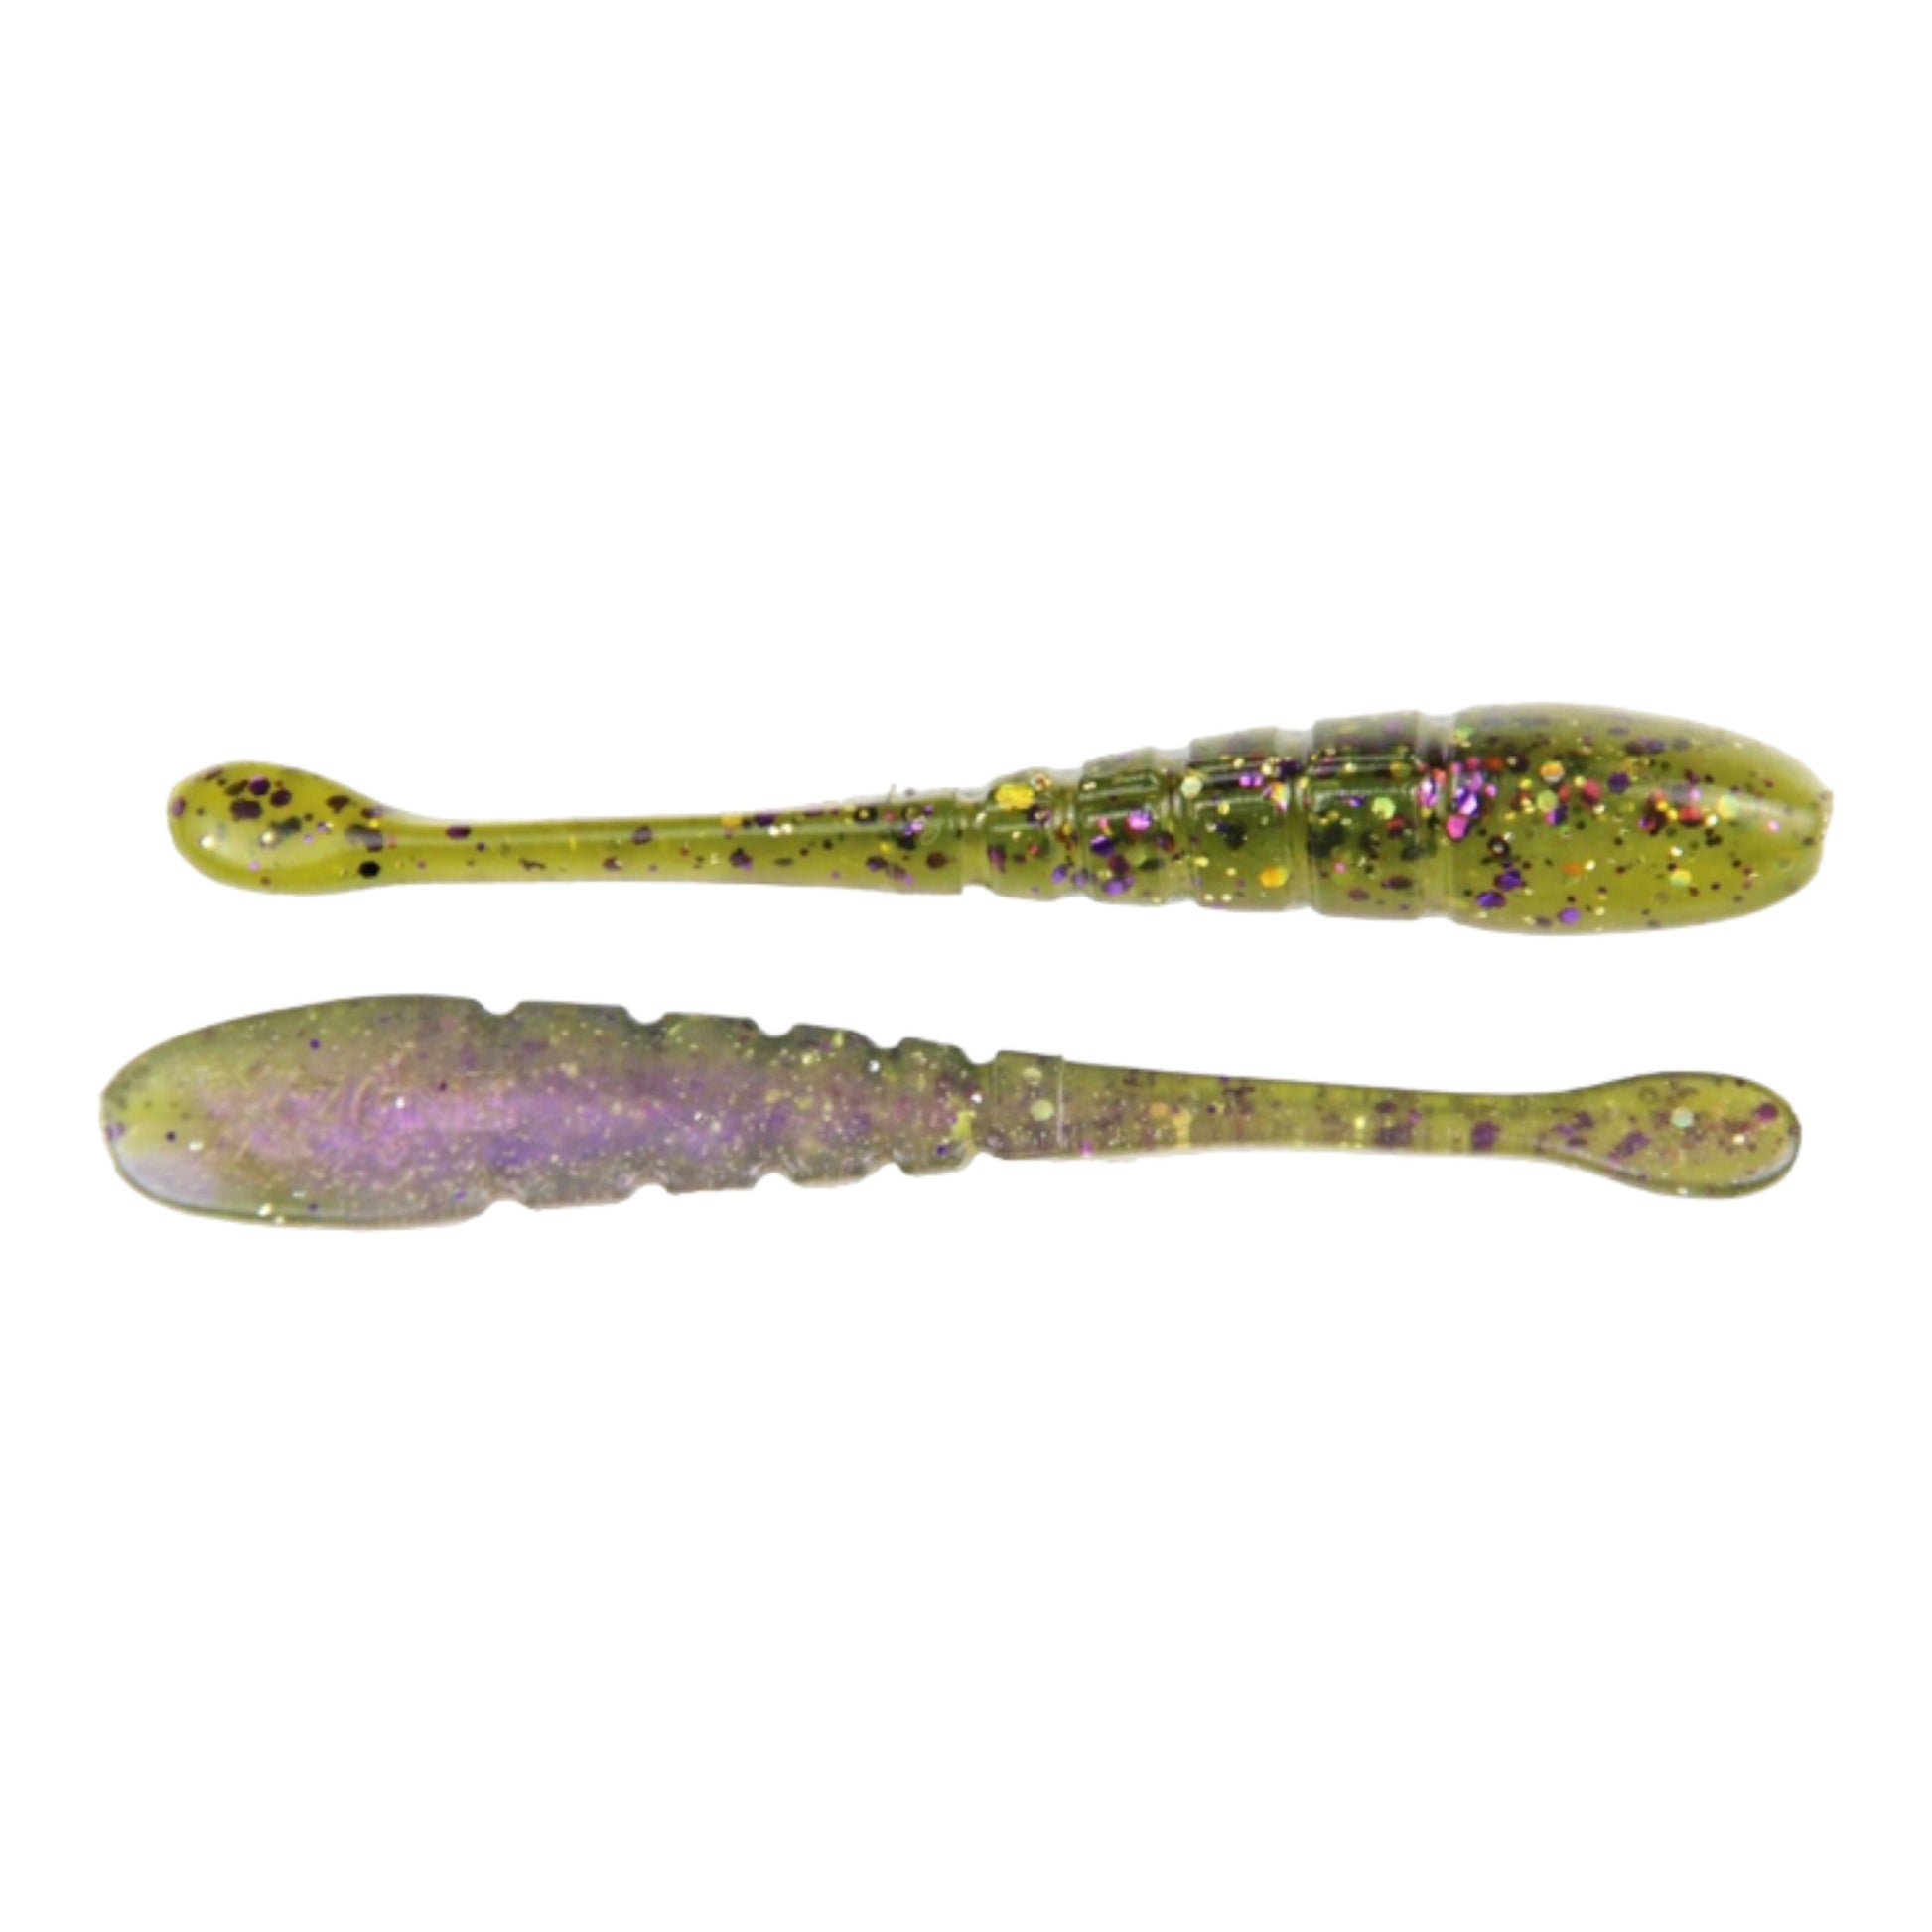 Xzone Lures Pro Series Finesse Slammer – Three Rivers Tackle